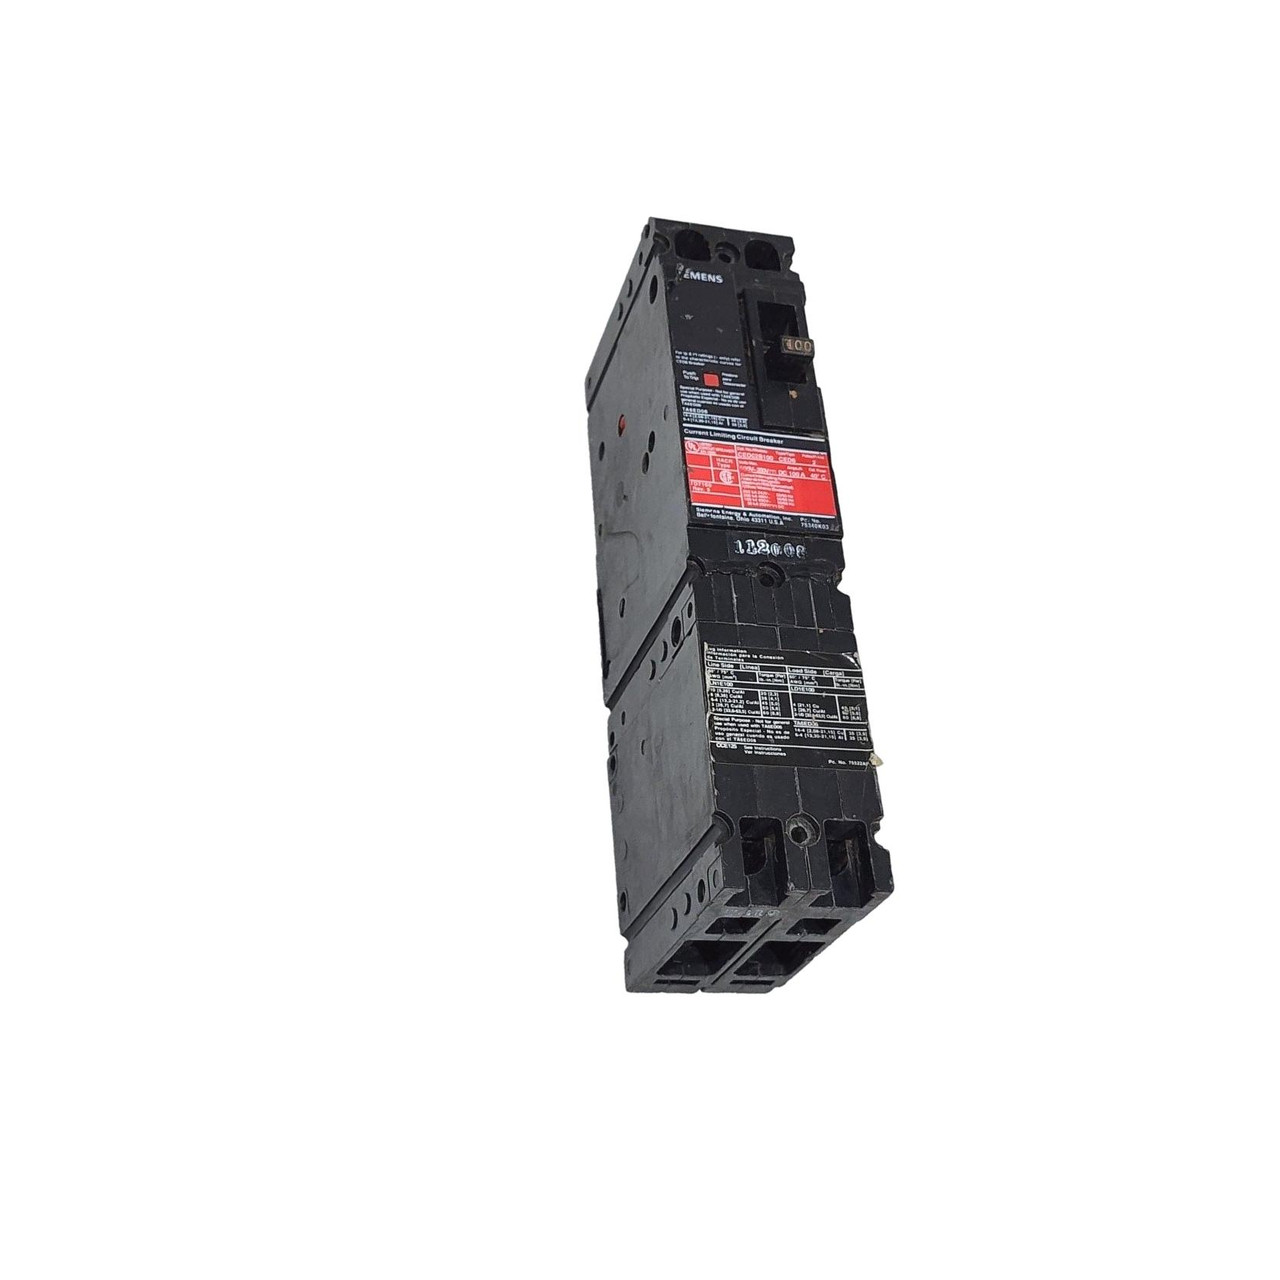 CED62B100
 Fuseless 100 Amp Current Limiting Circuit Breaker 
2 Pole/Single Phase Use